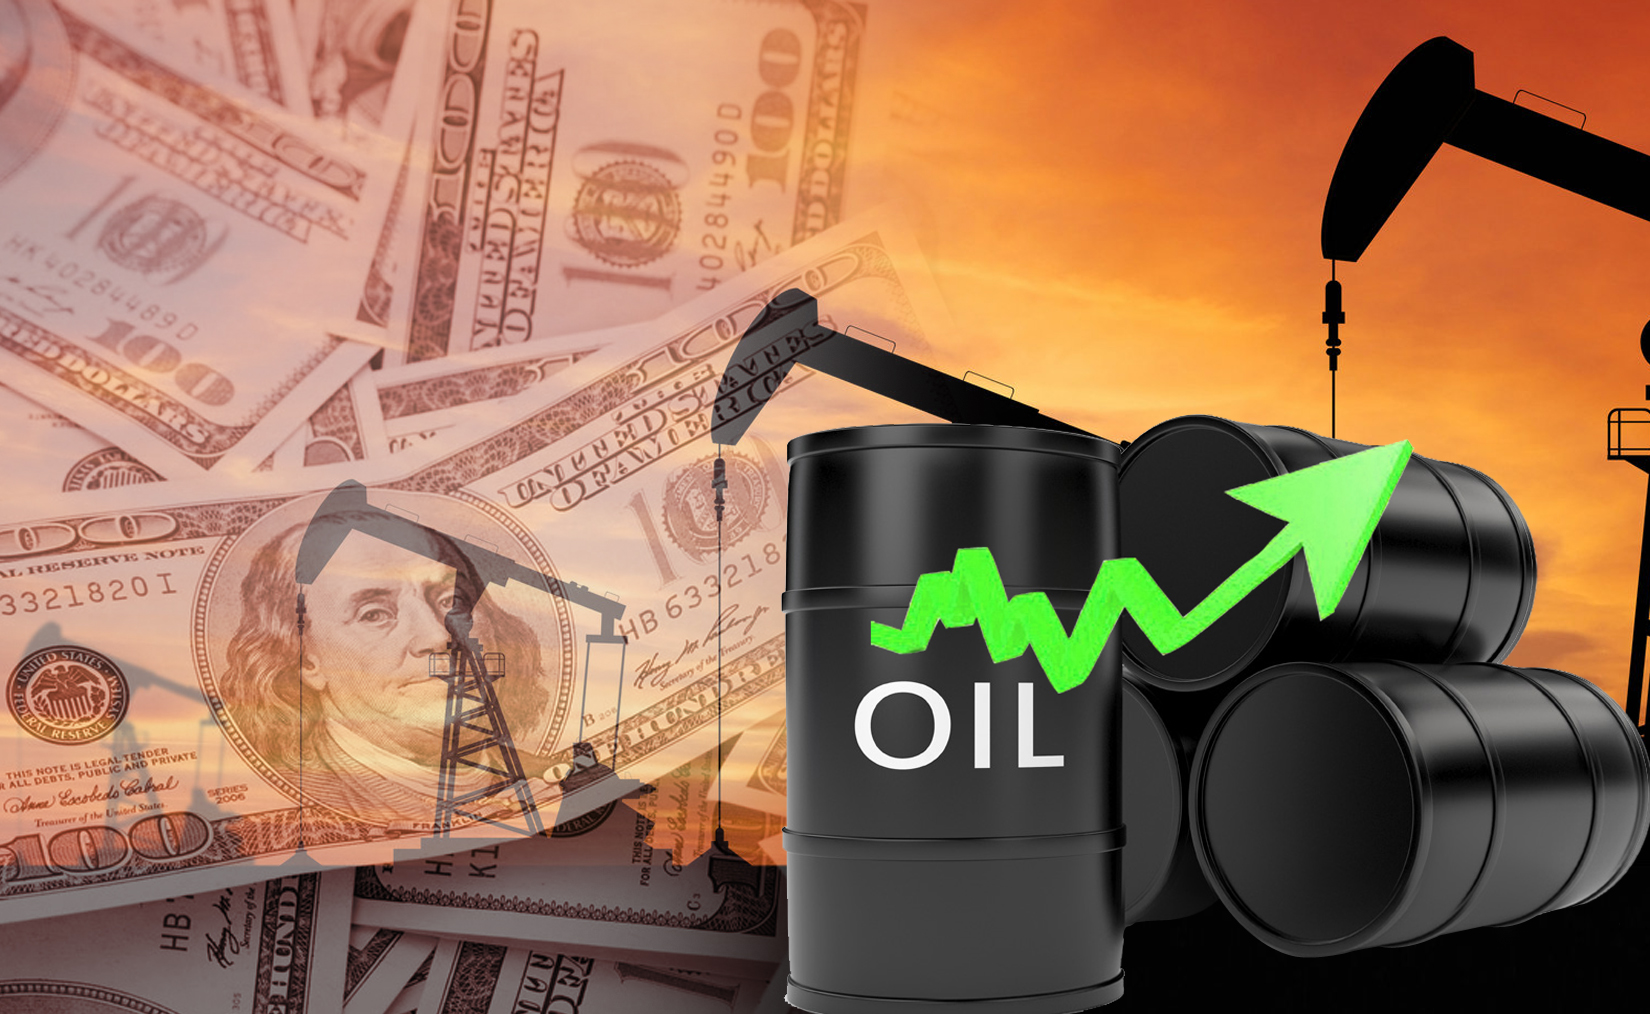 Kuwait oil up 44 cents to USD 51.08 pb